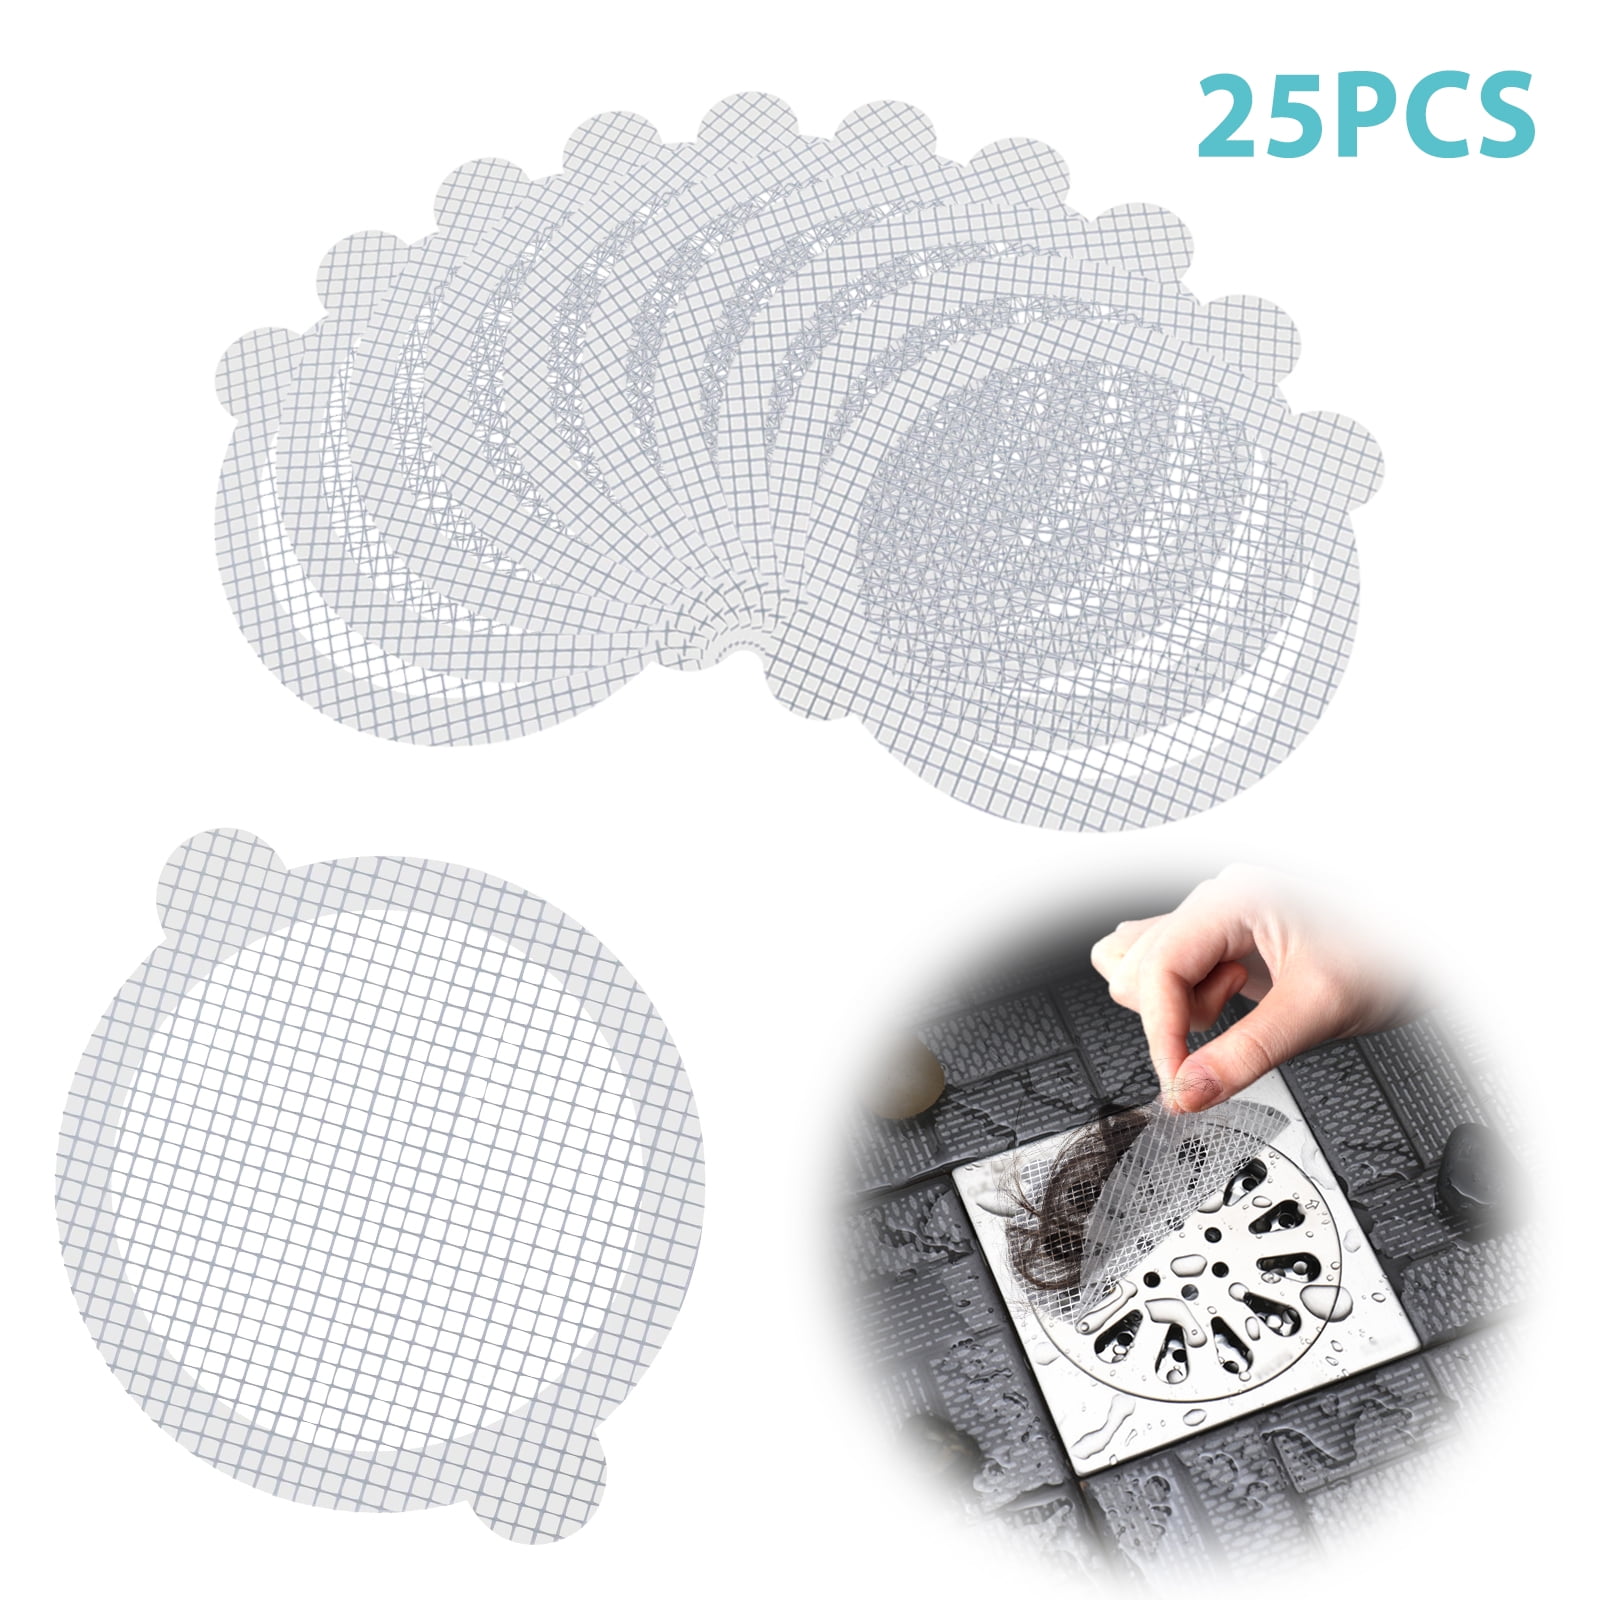 Drain Buddy Deluxe: 2 in 1 Bathtub Drain Stopper Strainer with Hair Catcher  1.5”